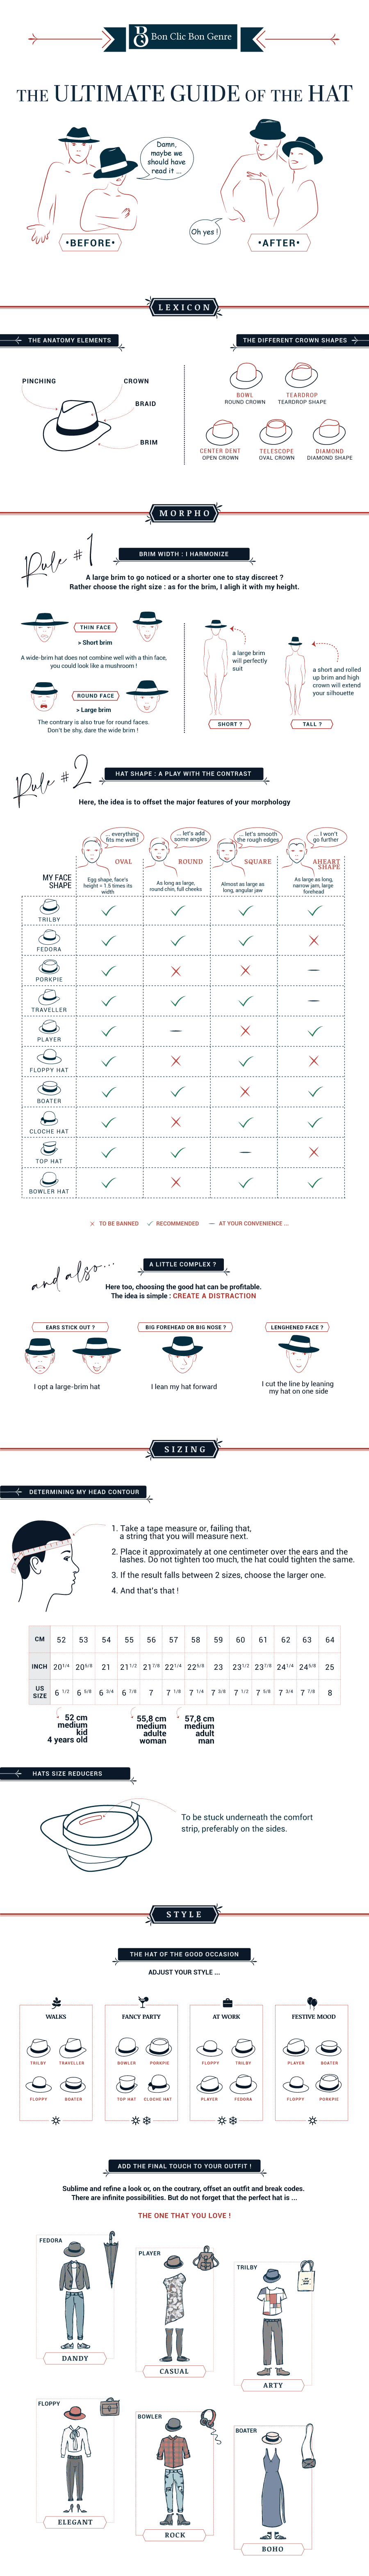 Guide - How to choose your hat